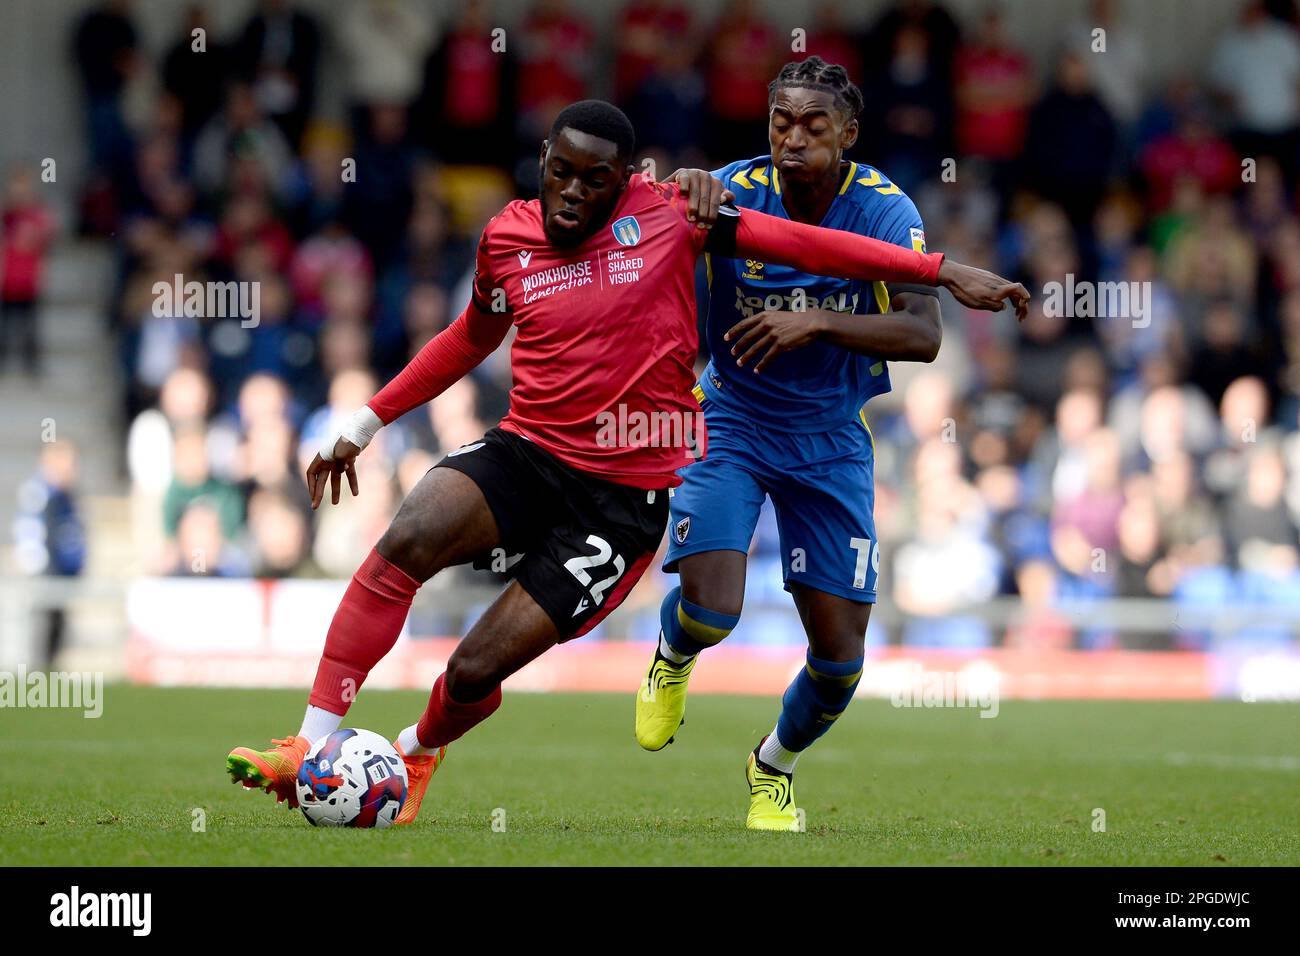 Junior Tchamadeu of Colchester United looks to get past Paris Maghoma of AFC Wimbledon - AFC Wimbledon v Colchester United, Sky Bet League Two, Cherry Red Records Stadium, Wimbledon, UK - 22nd October 2022  Editorial Use Only - DataCo restrictions apply Stock Photo